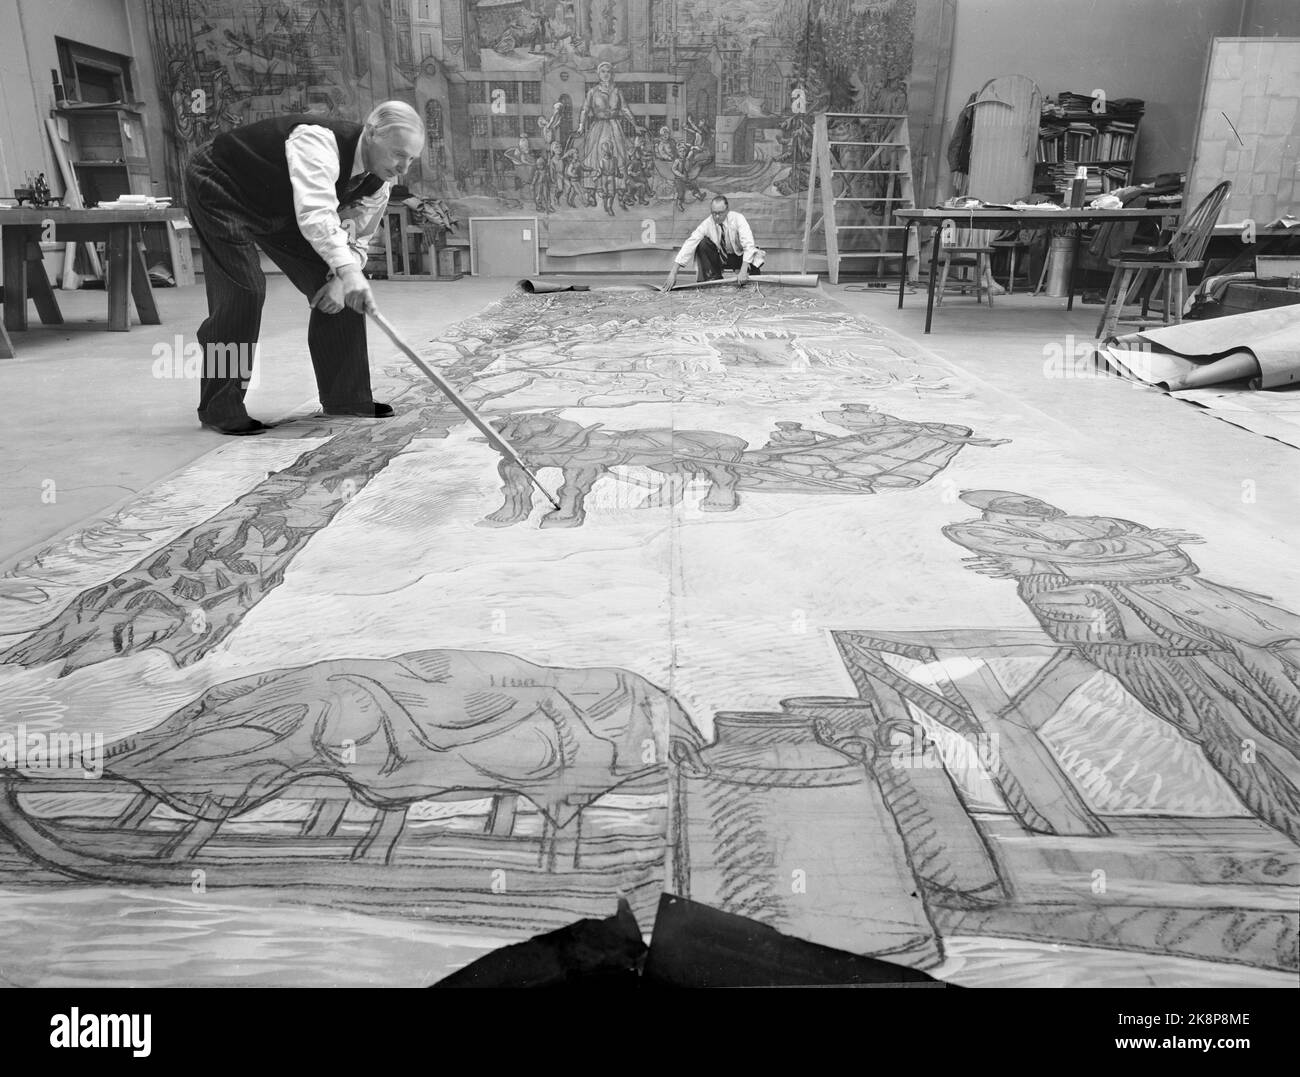 Oslo 195012. The artist Per Krohg has been given the honorable assignment to take care of the interior and artistic design of the security council's meeting room in the UN. The Ministry of Foreign Affairs has allocated money for the work that is a gift from Norway. Here we see Per Krohg while working on the painting in a studio in the town hall. The finished oil painting will measure 5.48 x 8.84 meters. Photo: Current / NTB Stock Photo